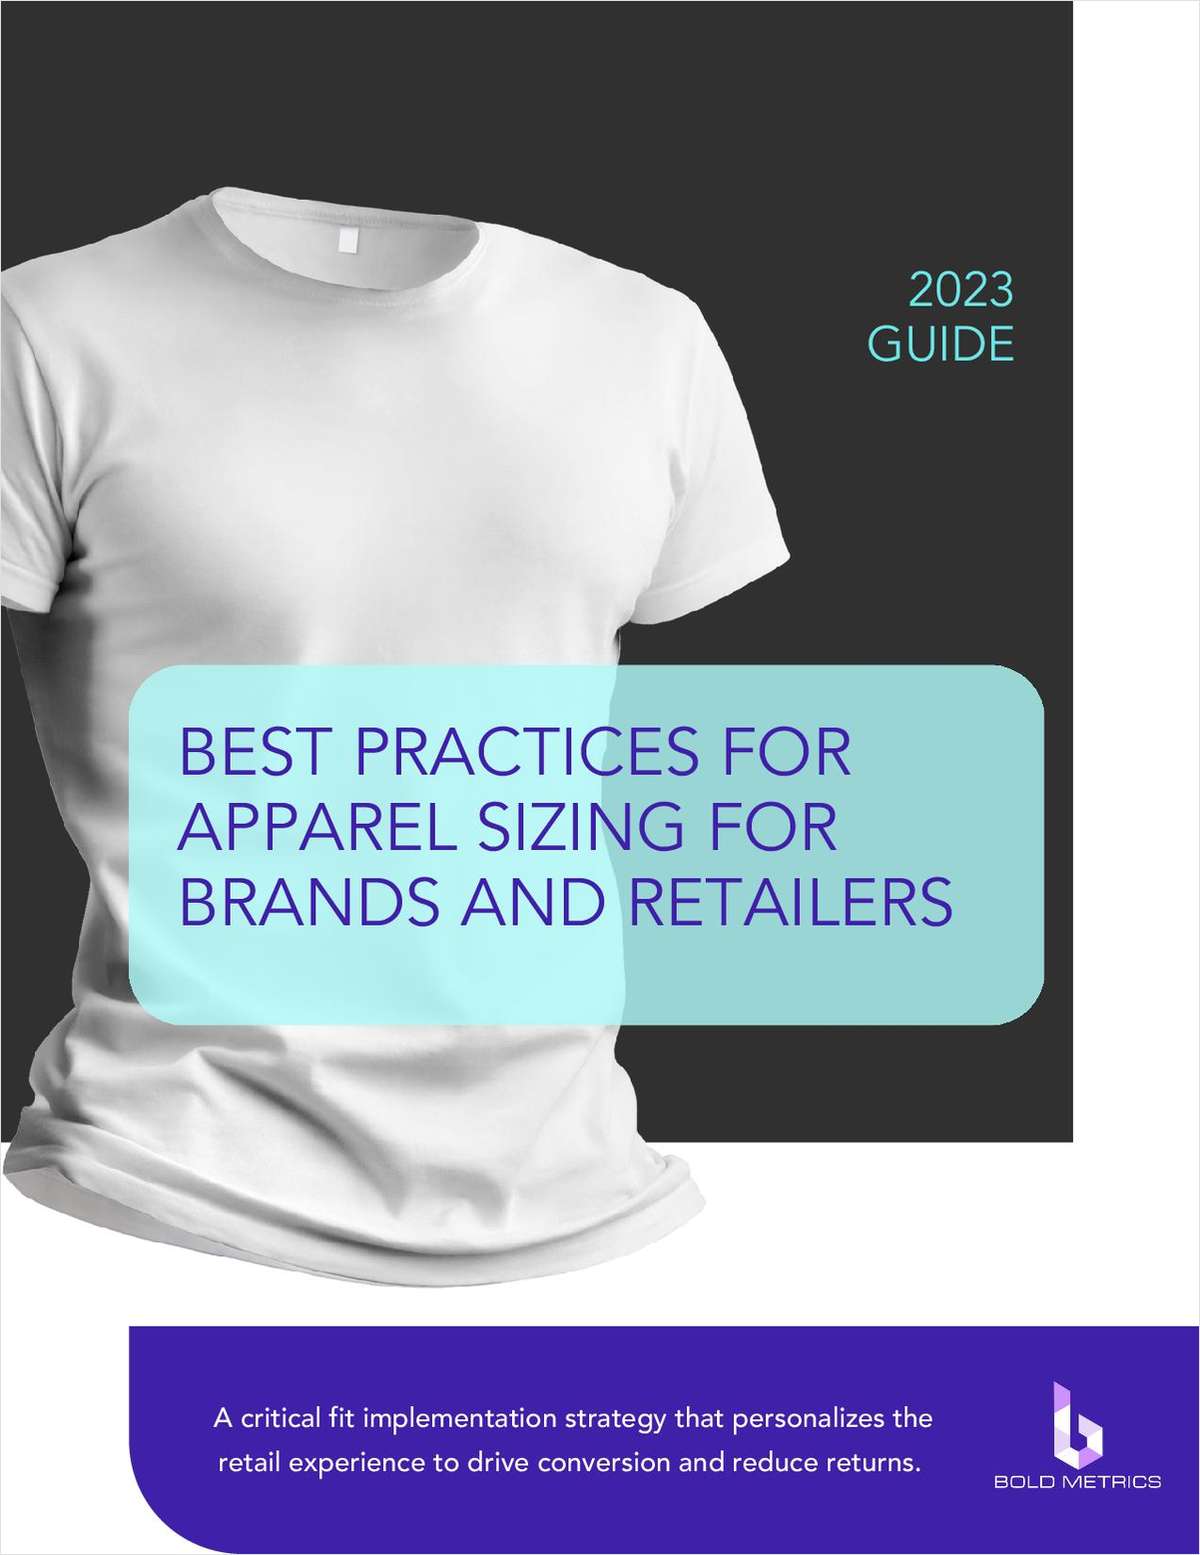 Best Practices for Apparel Sizing for Brands and Retailers